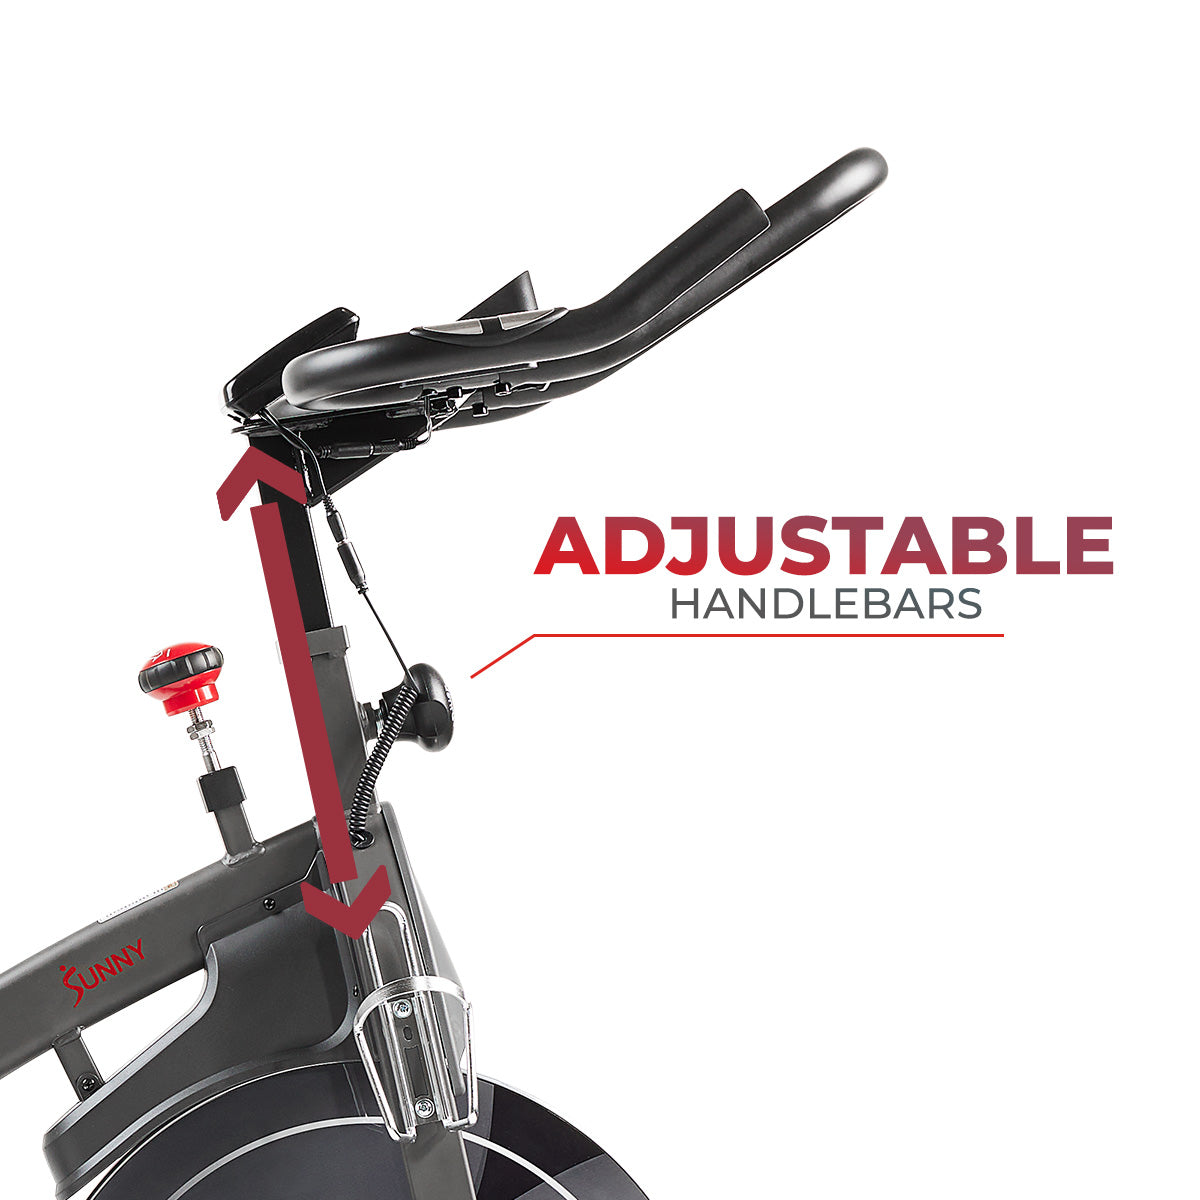 Premium Magnetic Resistance Smart Indoor Cycling Bike with Quiet Belt Drive and Exclusive SunnyFit? App Enhanced Bluetooth Connectivity